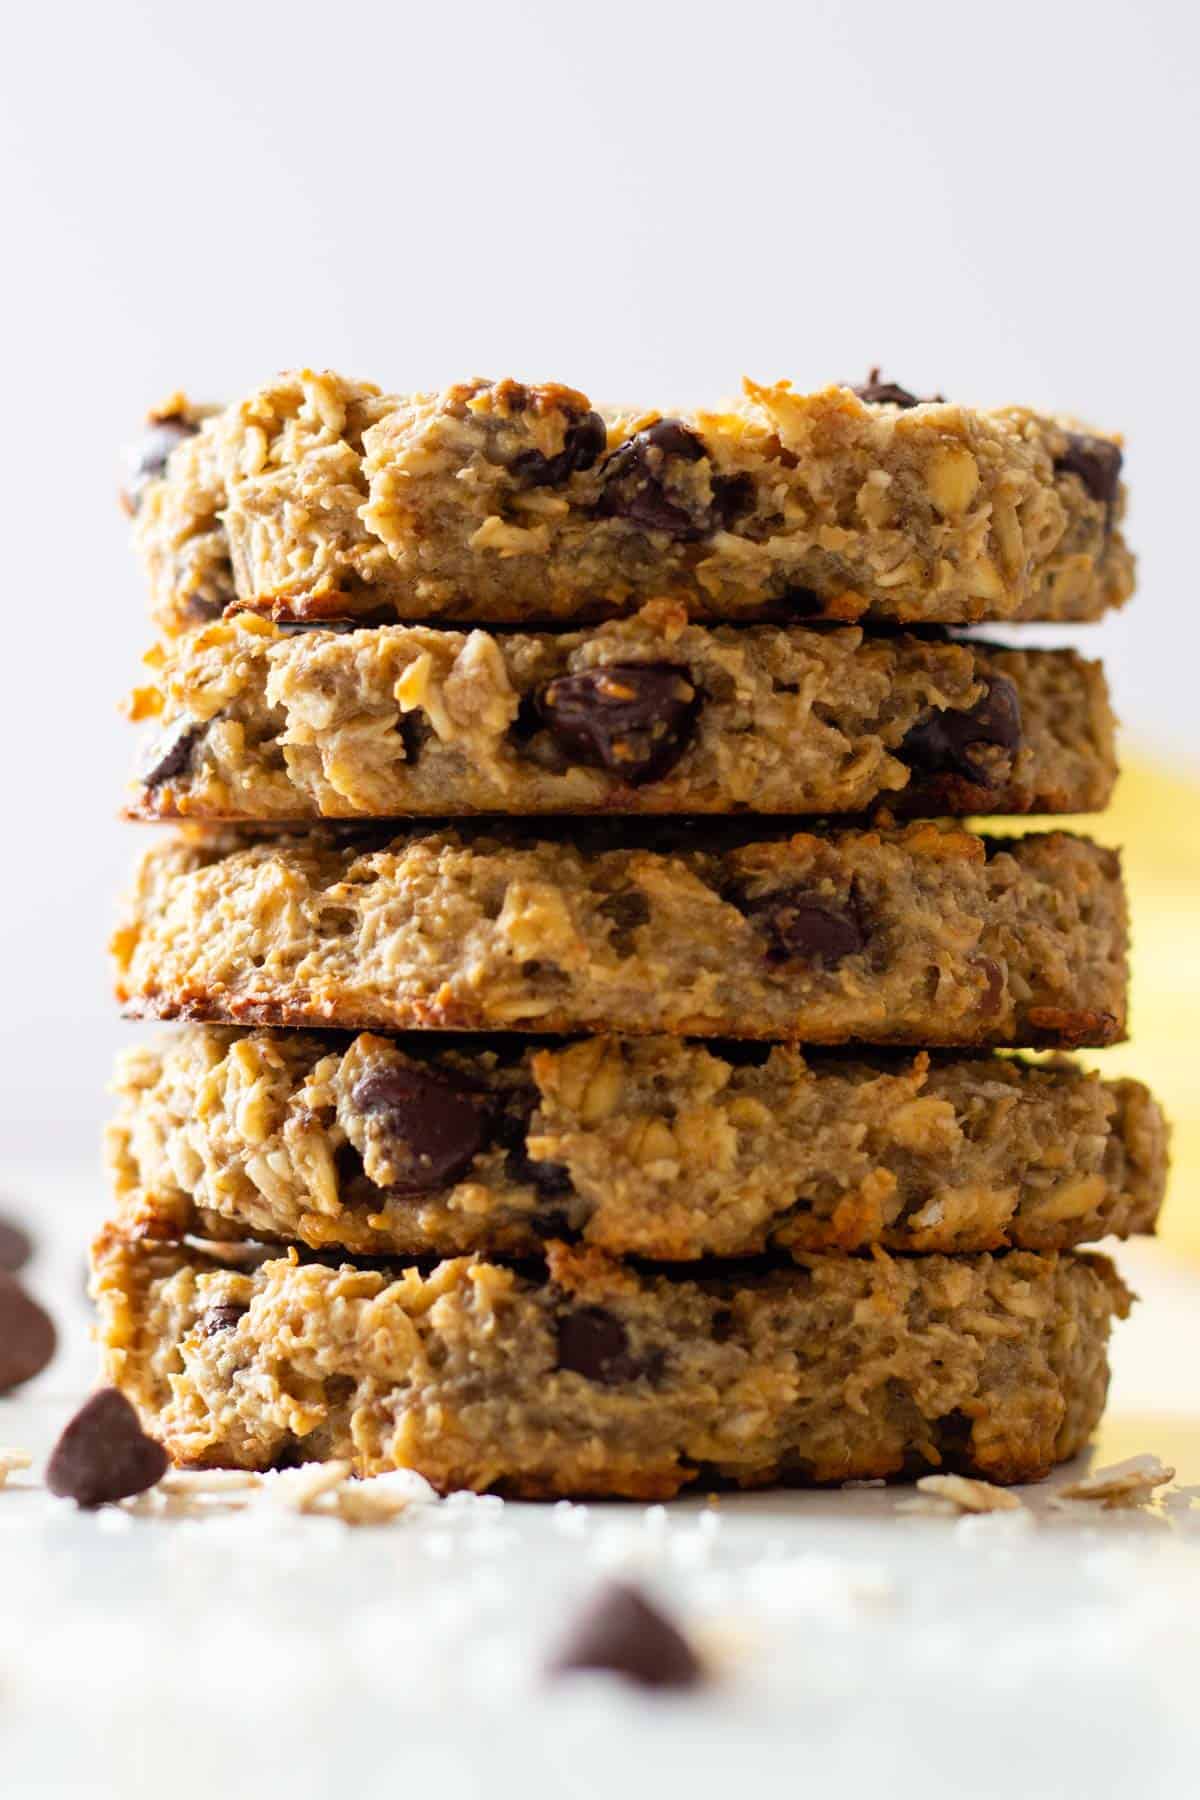 5 Oatmeal Cookies stacked on top of each other.